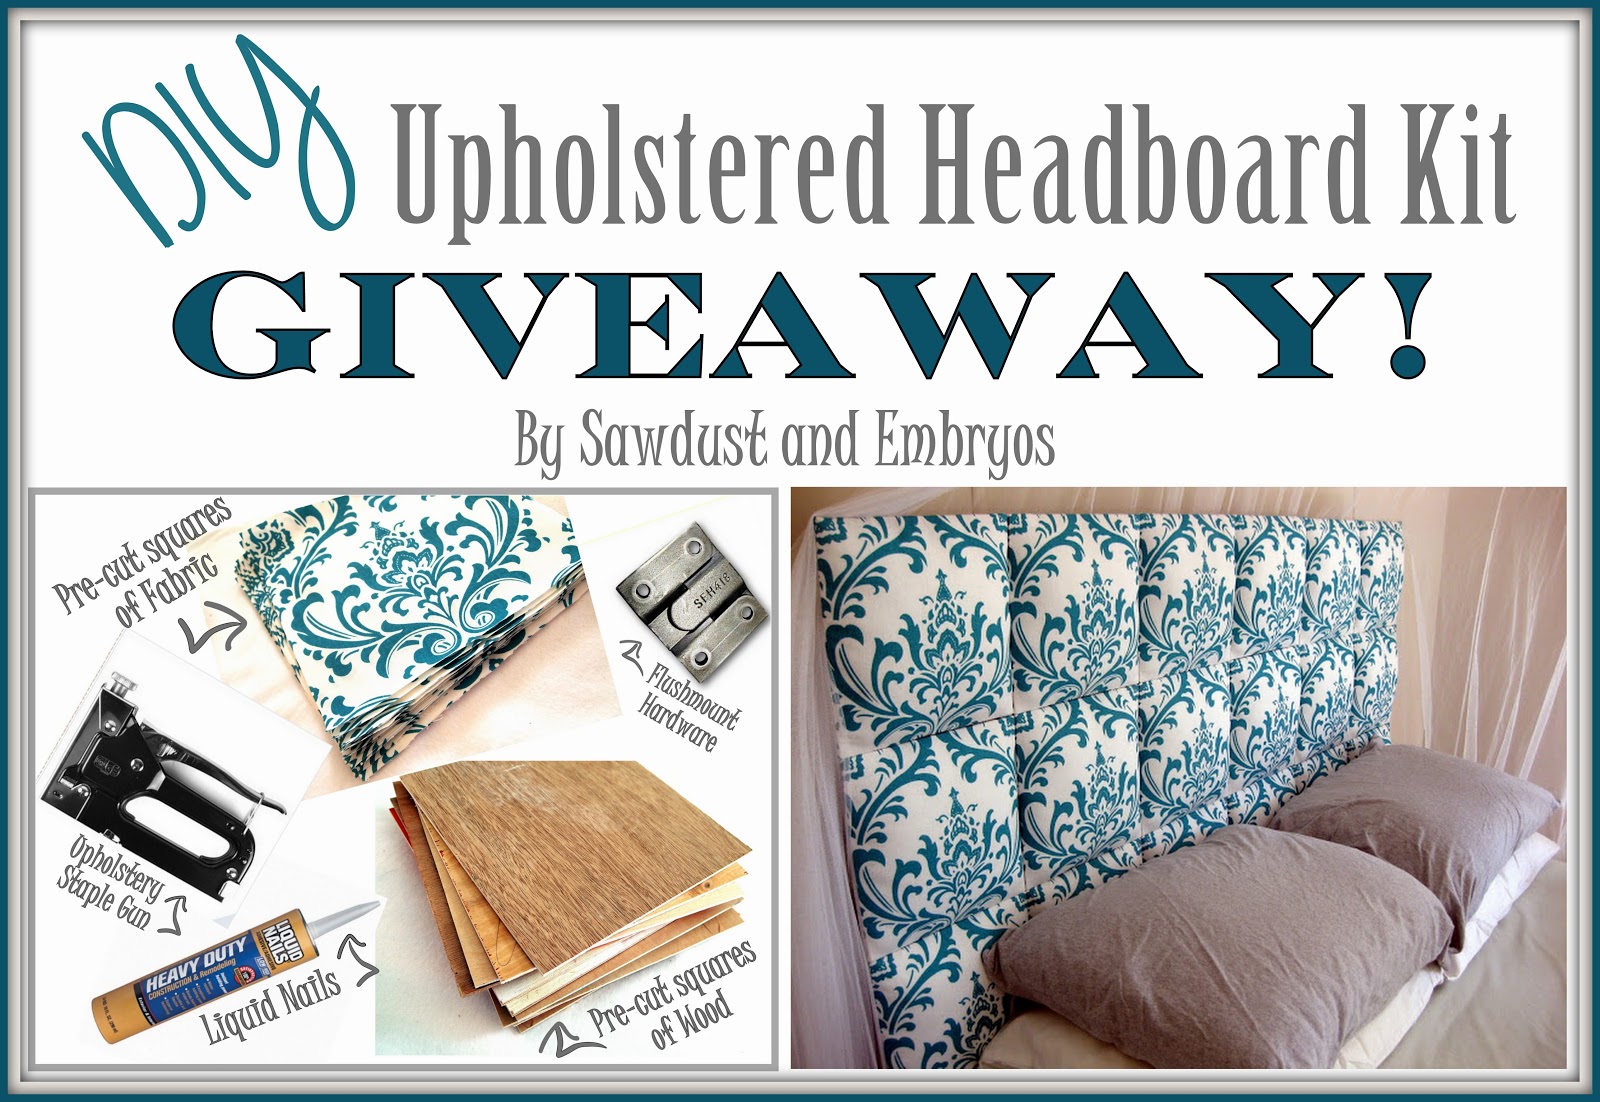 [DIY%2520Upholstered%2520Headboard%2520Kit%2520GIVEAWAY%2521%2520%257Bby%2520Sawdust%2520and%2520Embryos%257D%255B5%255D.jpg]